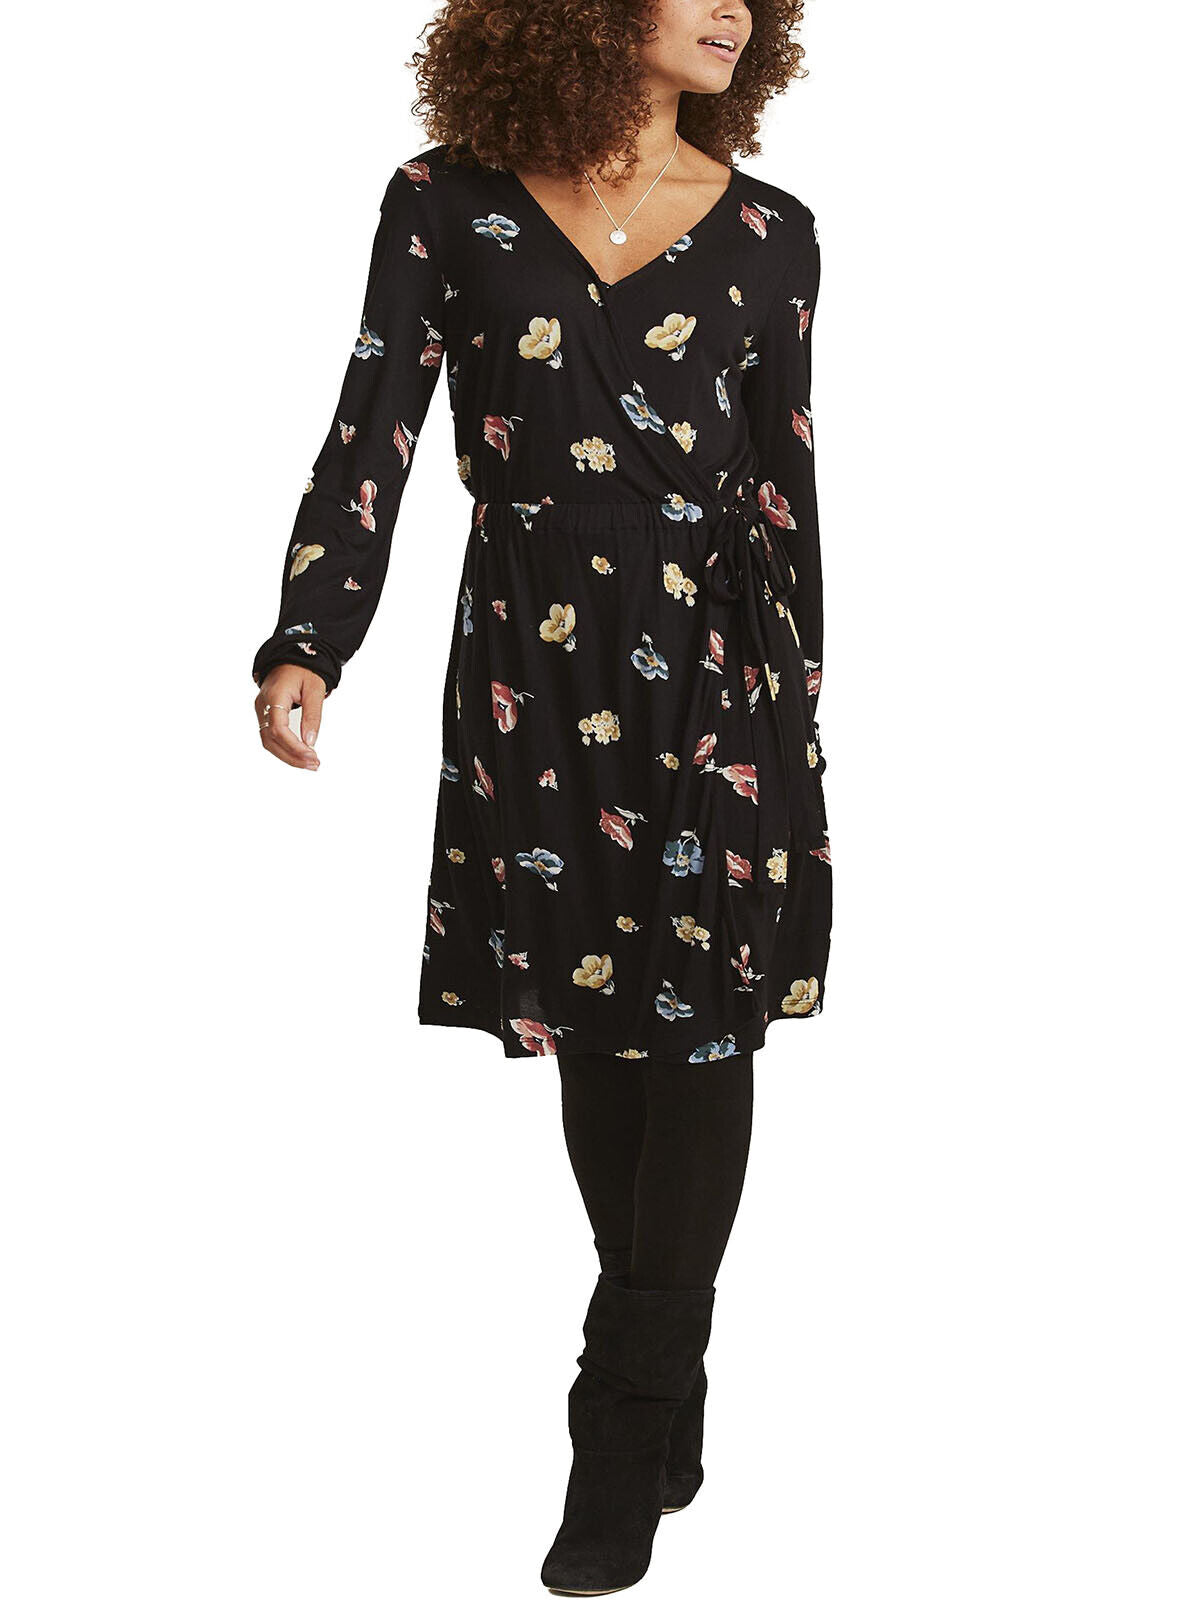 EX Fat Face Black Teri Floral Dress in Sizes 8 or 12 RRP £46